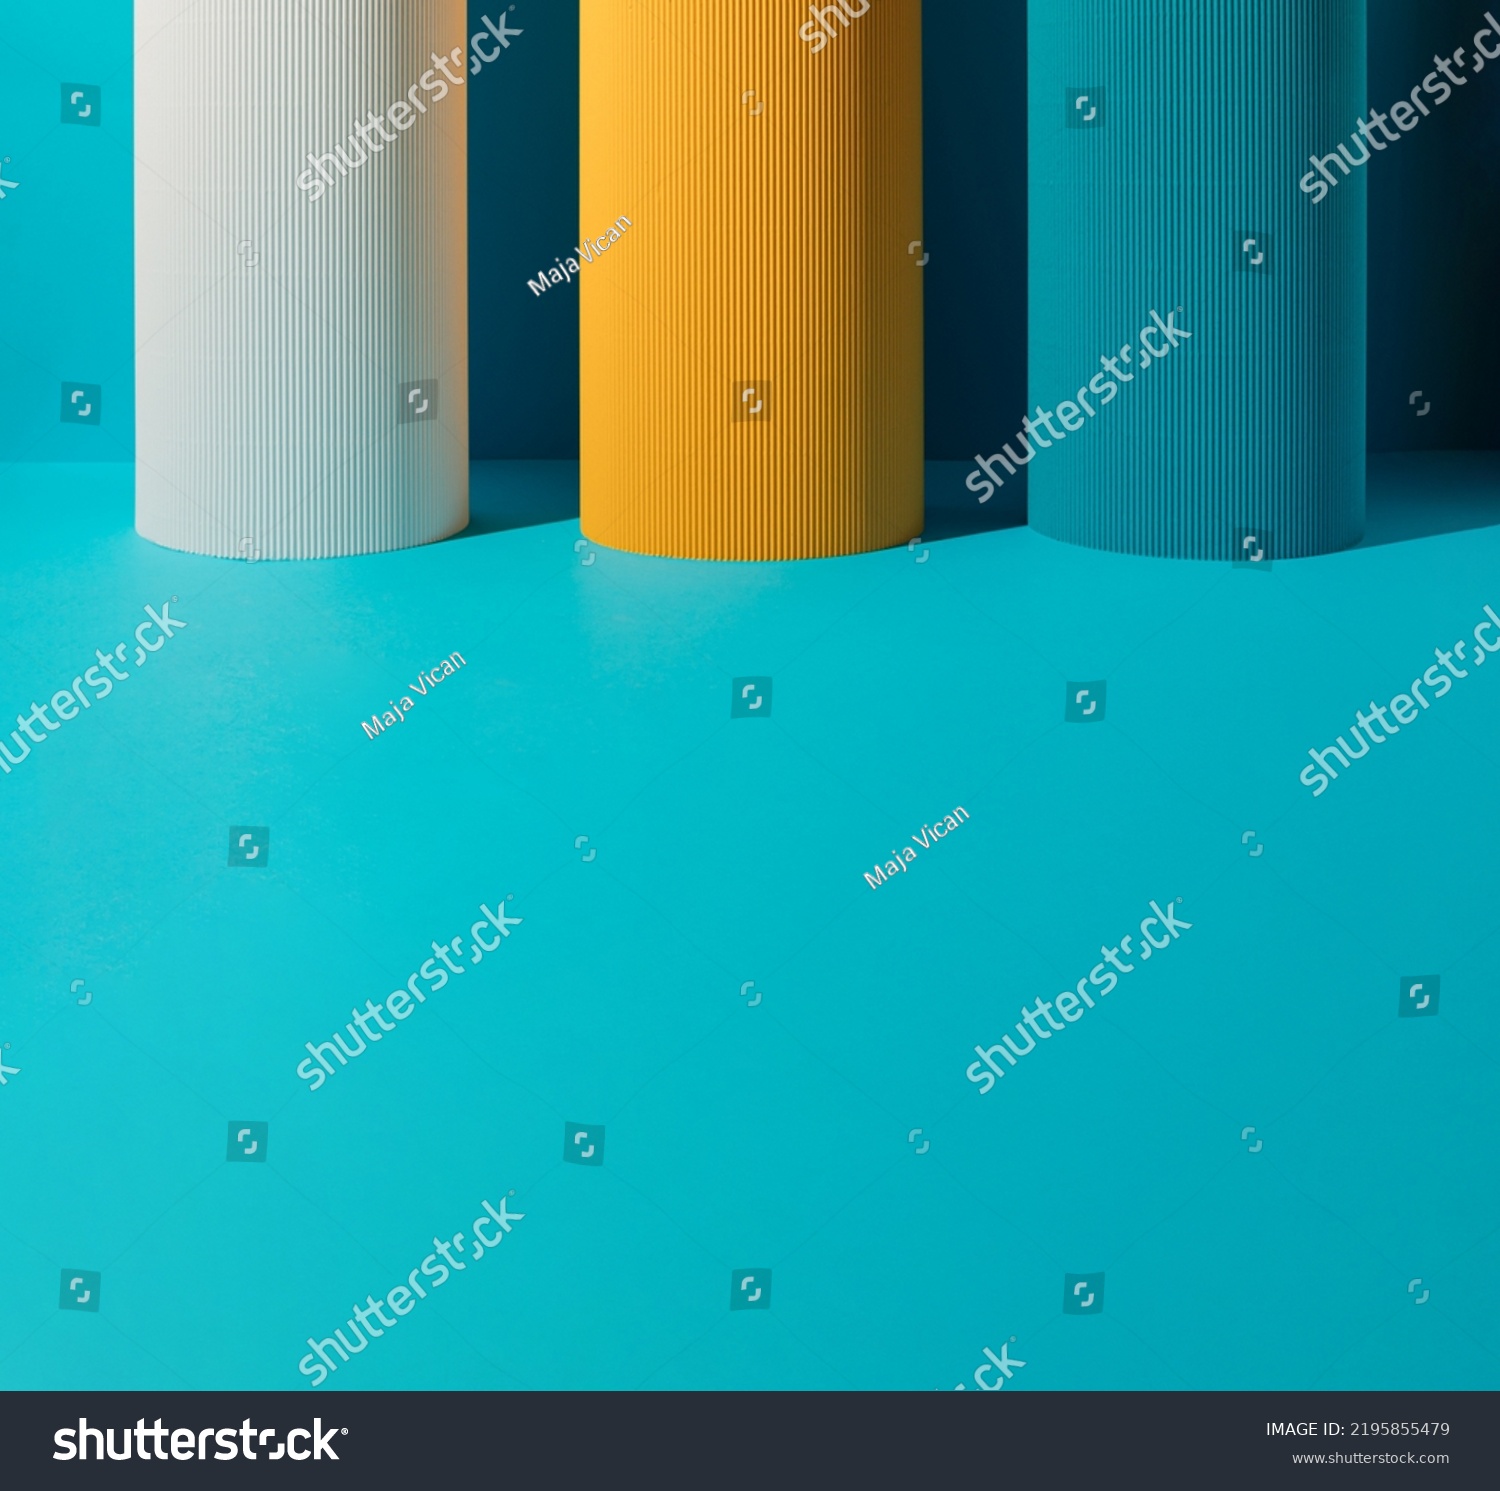 Three paper pillars - white, yellow and blue on blue background with copy space. #2195855479